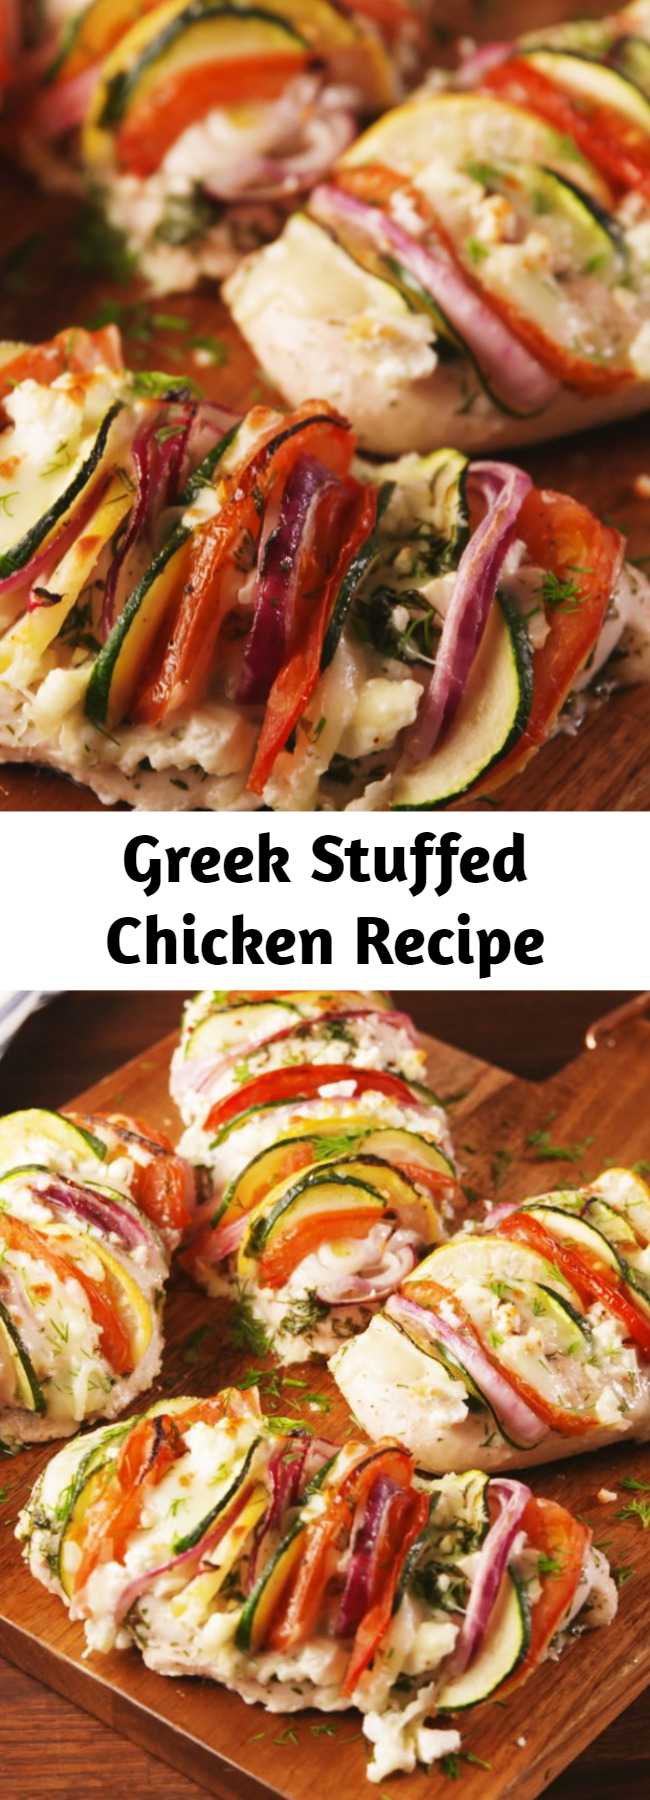 Greek Stuffed Chicken Recipe - You'll Greek out over this. #food #lowcarb #gf #glutenfree #healthy